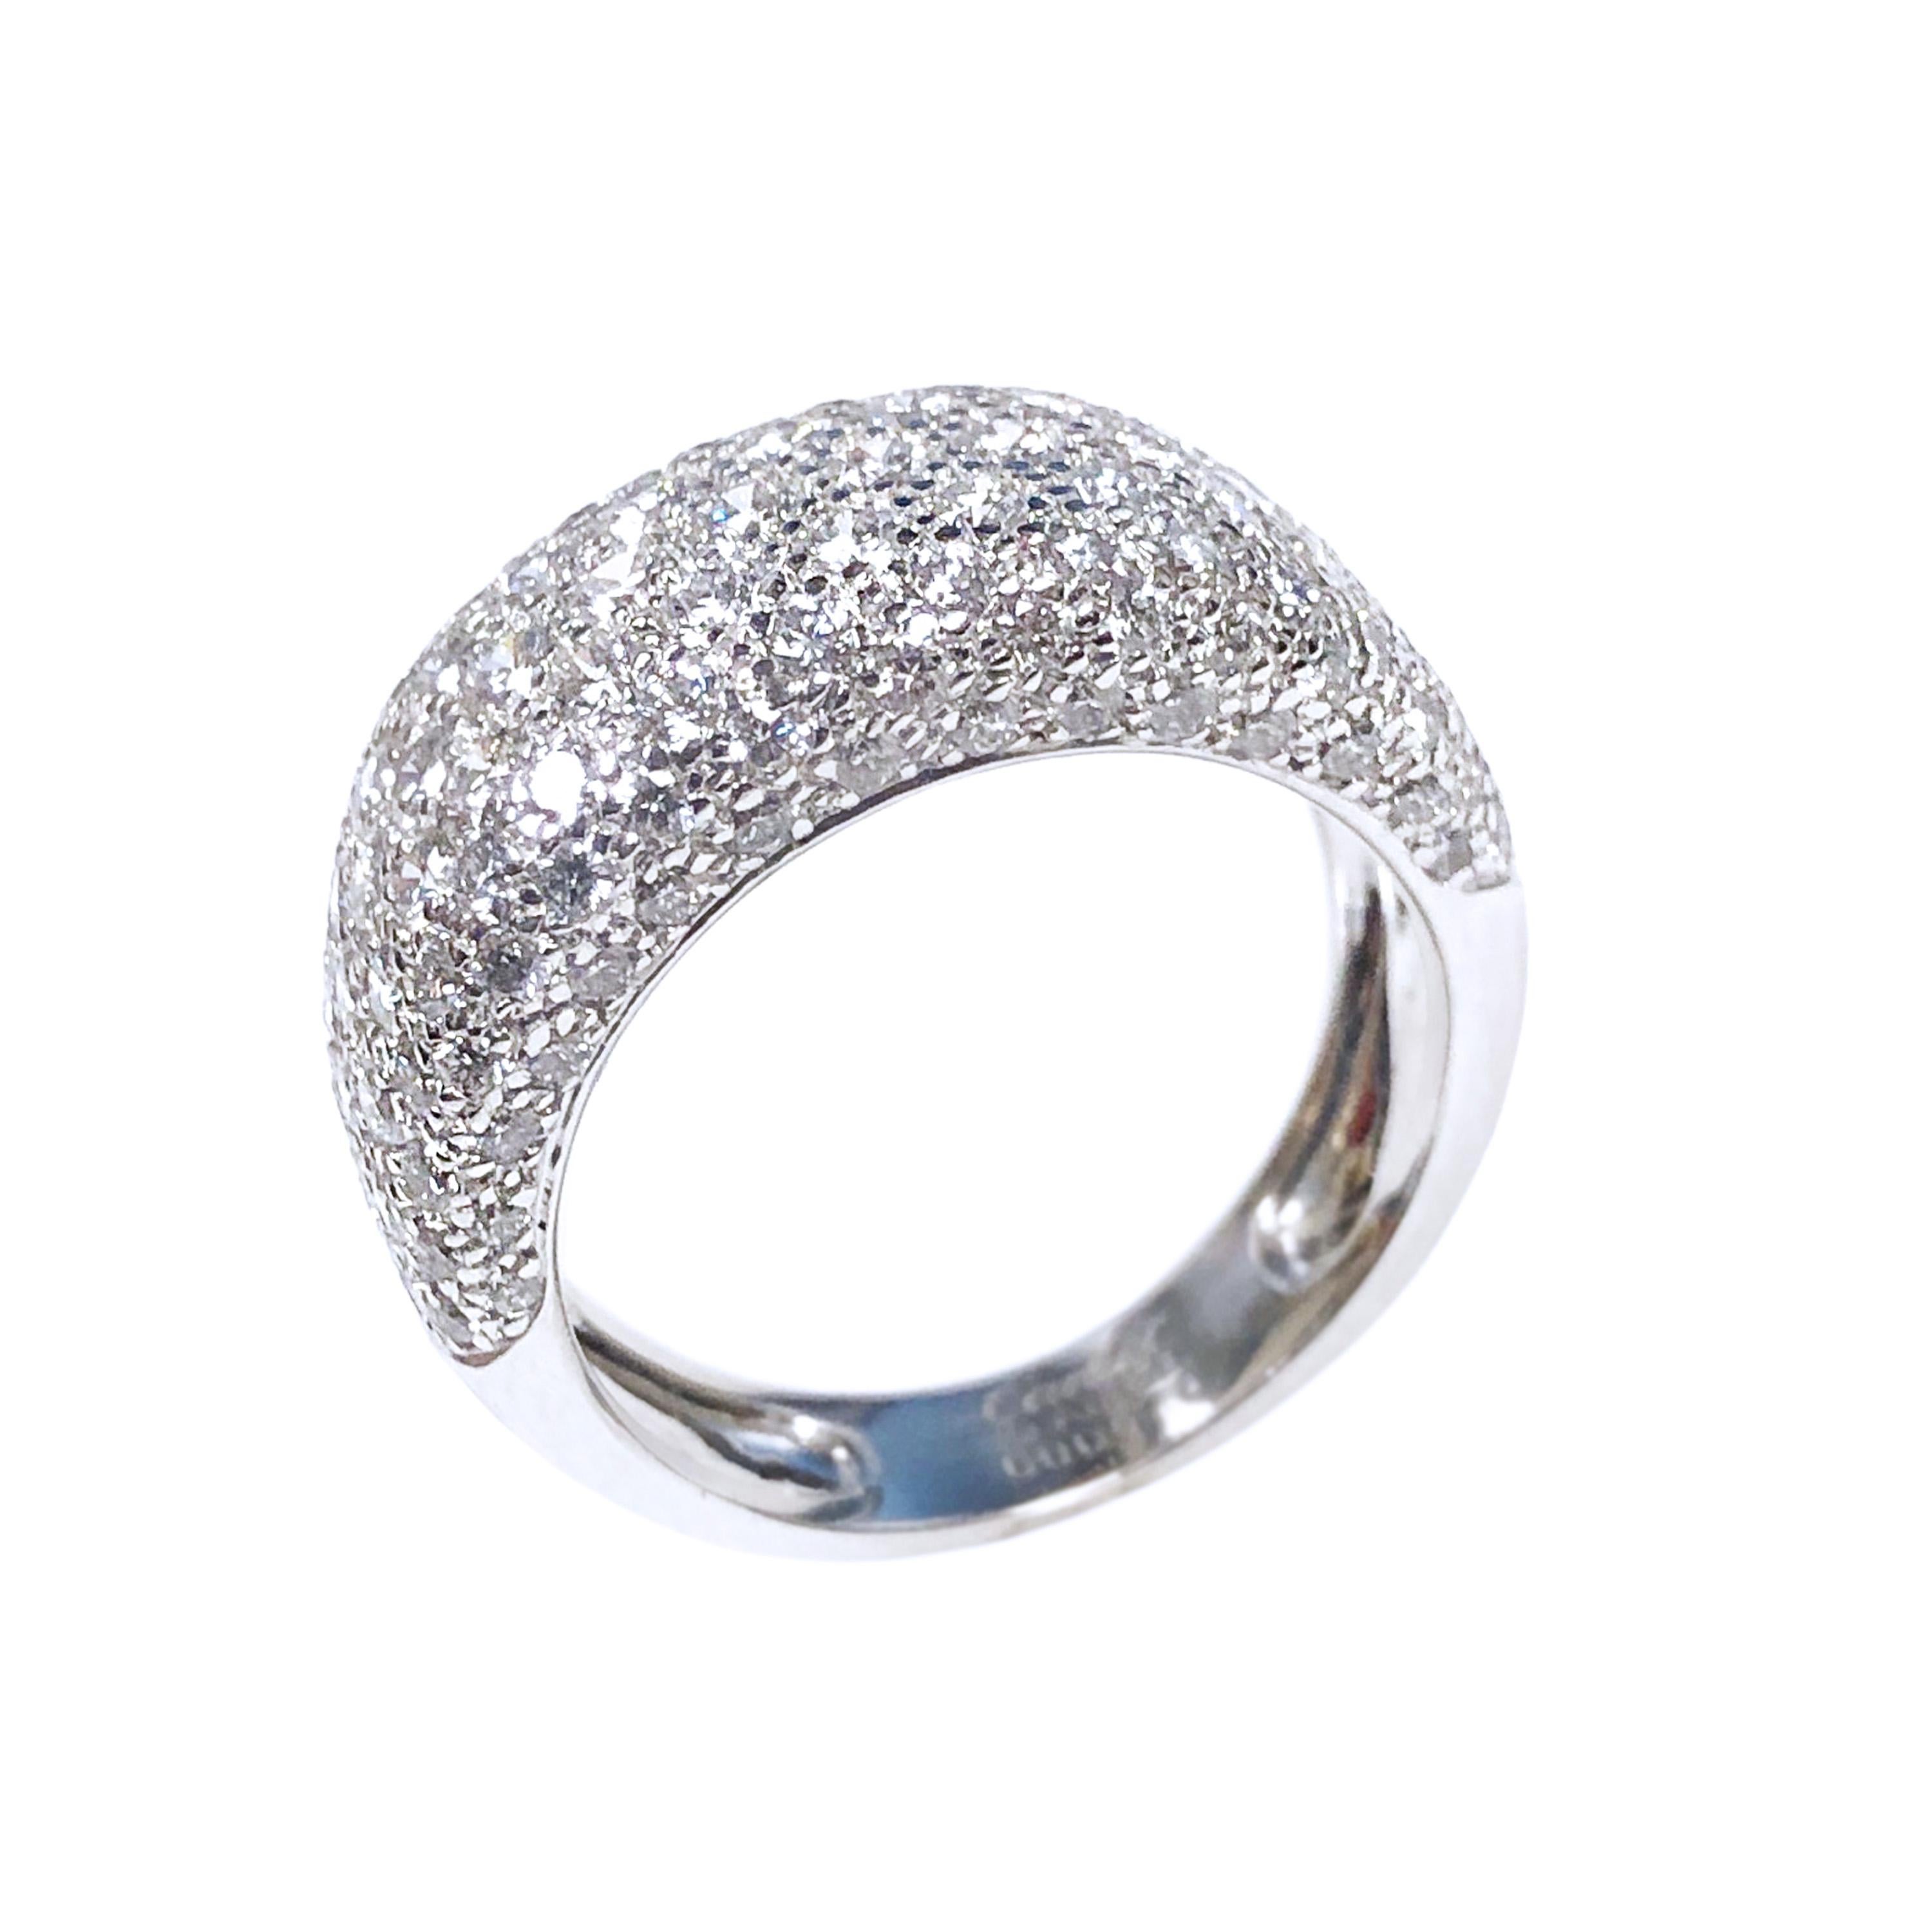 Circa 2005 Cartier Nouvelle Vague 18K White Gold Ring, in a Dome form and measuring 7/8 inch in length across the top and 3/8 inch wide. Pave set with 133 Round Brilliant cut Diamonds totaling 2.41 Carats and grading as F - G in Color and VS in